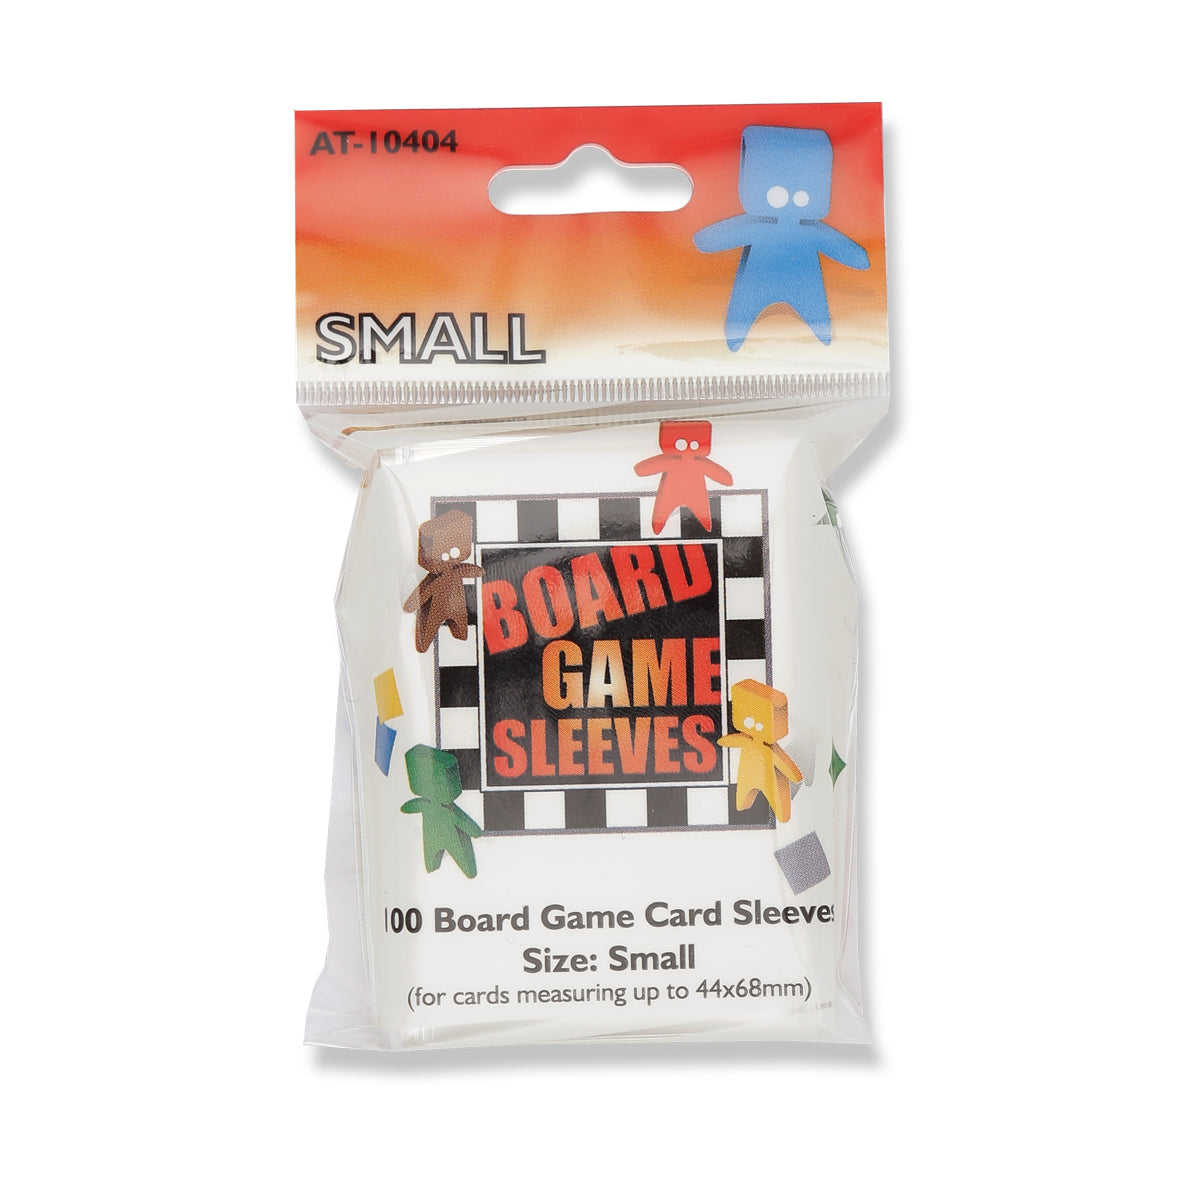 Board Games Sleeves - Small Cards (44x68mm)